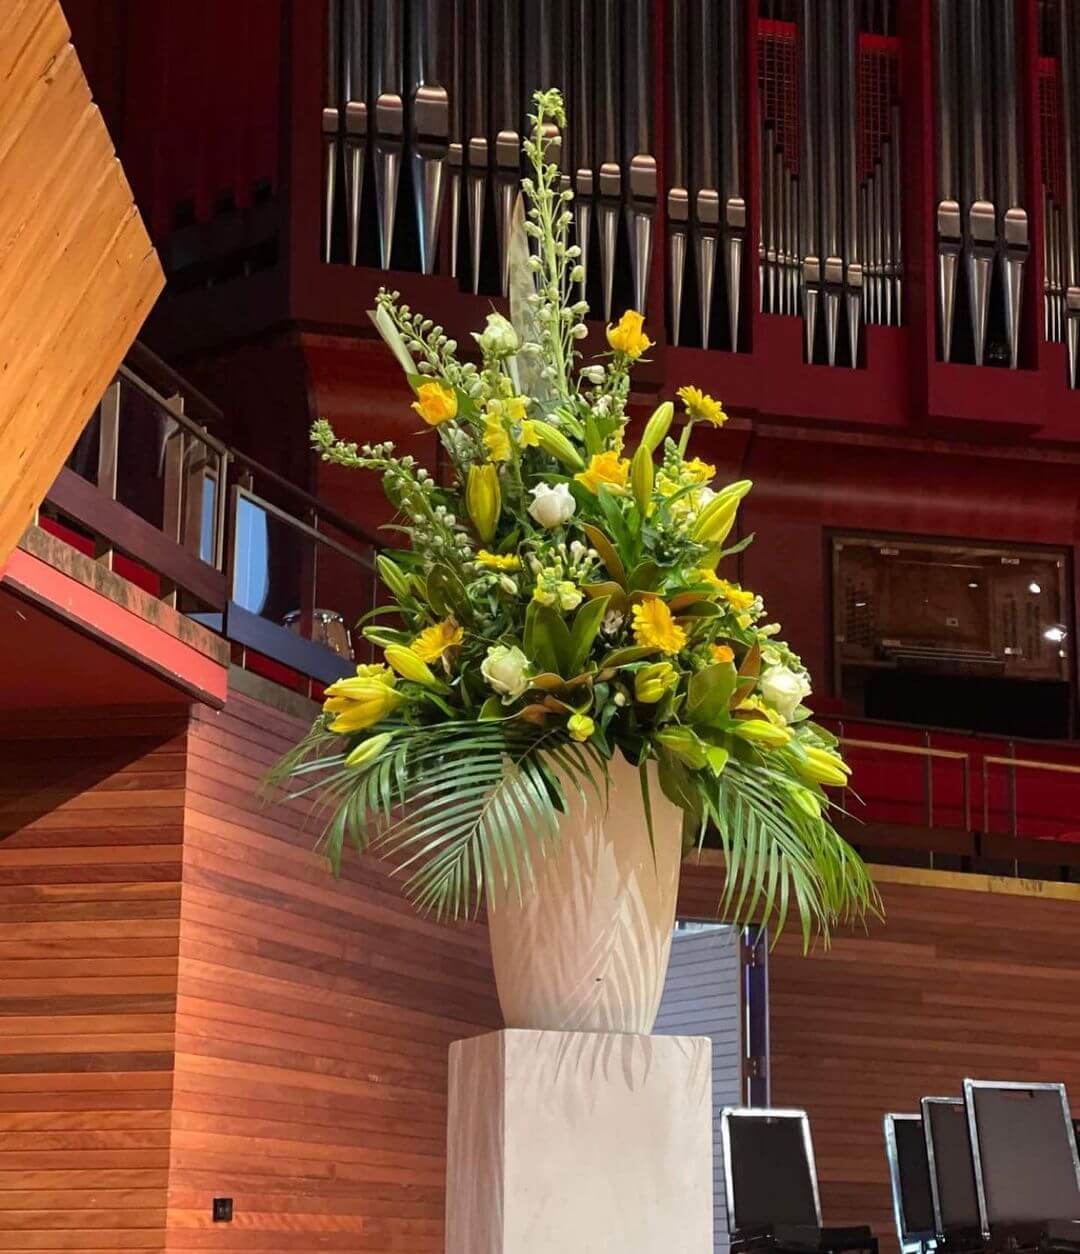 Corporate flower arrangement we made for an event in the Christchurch town hall